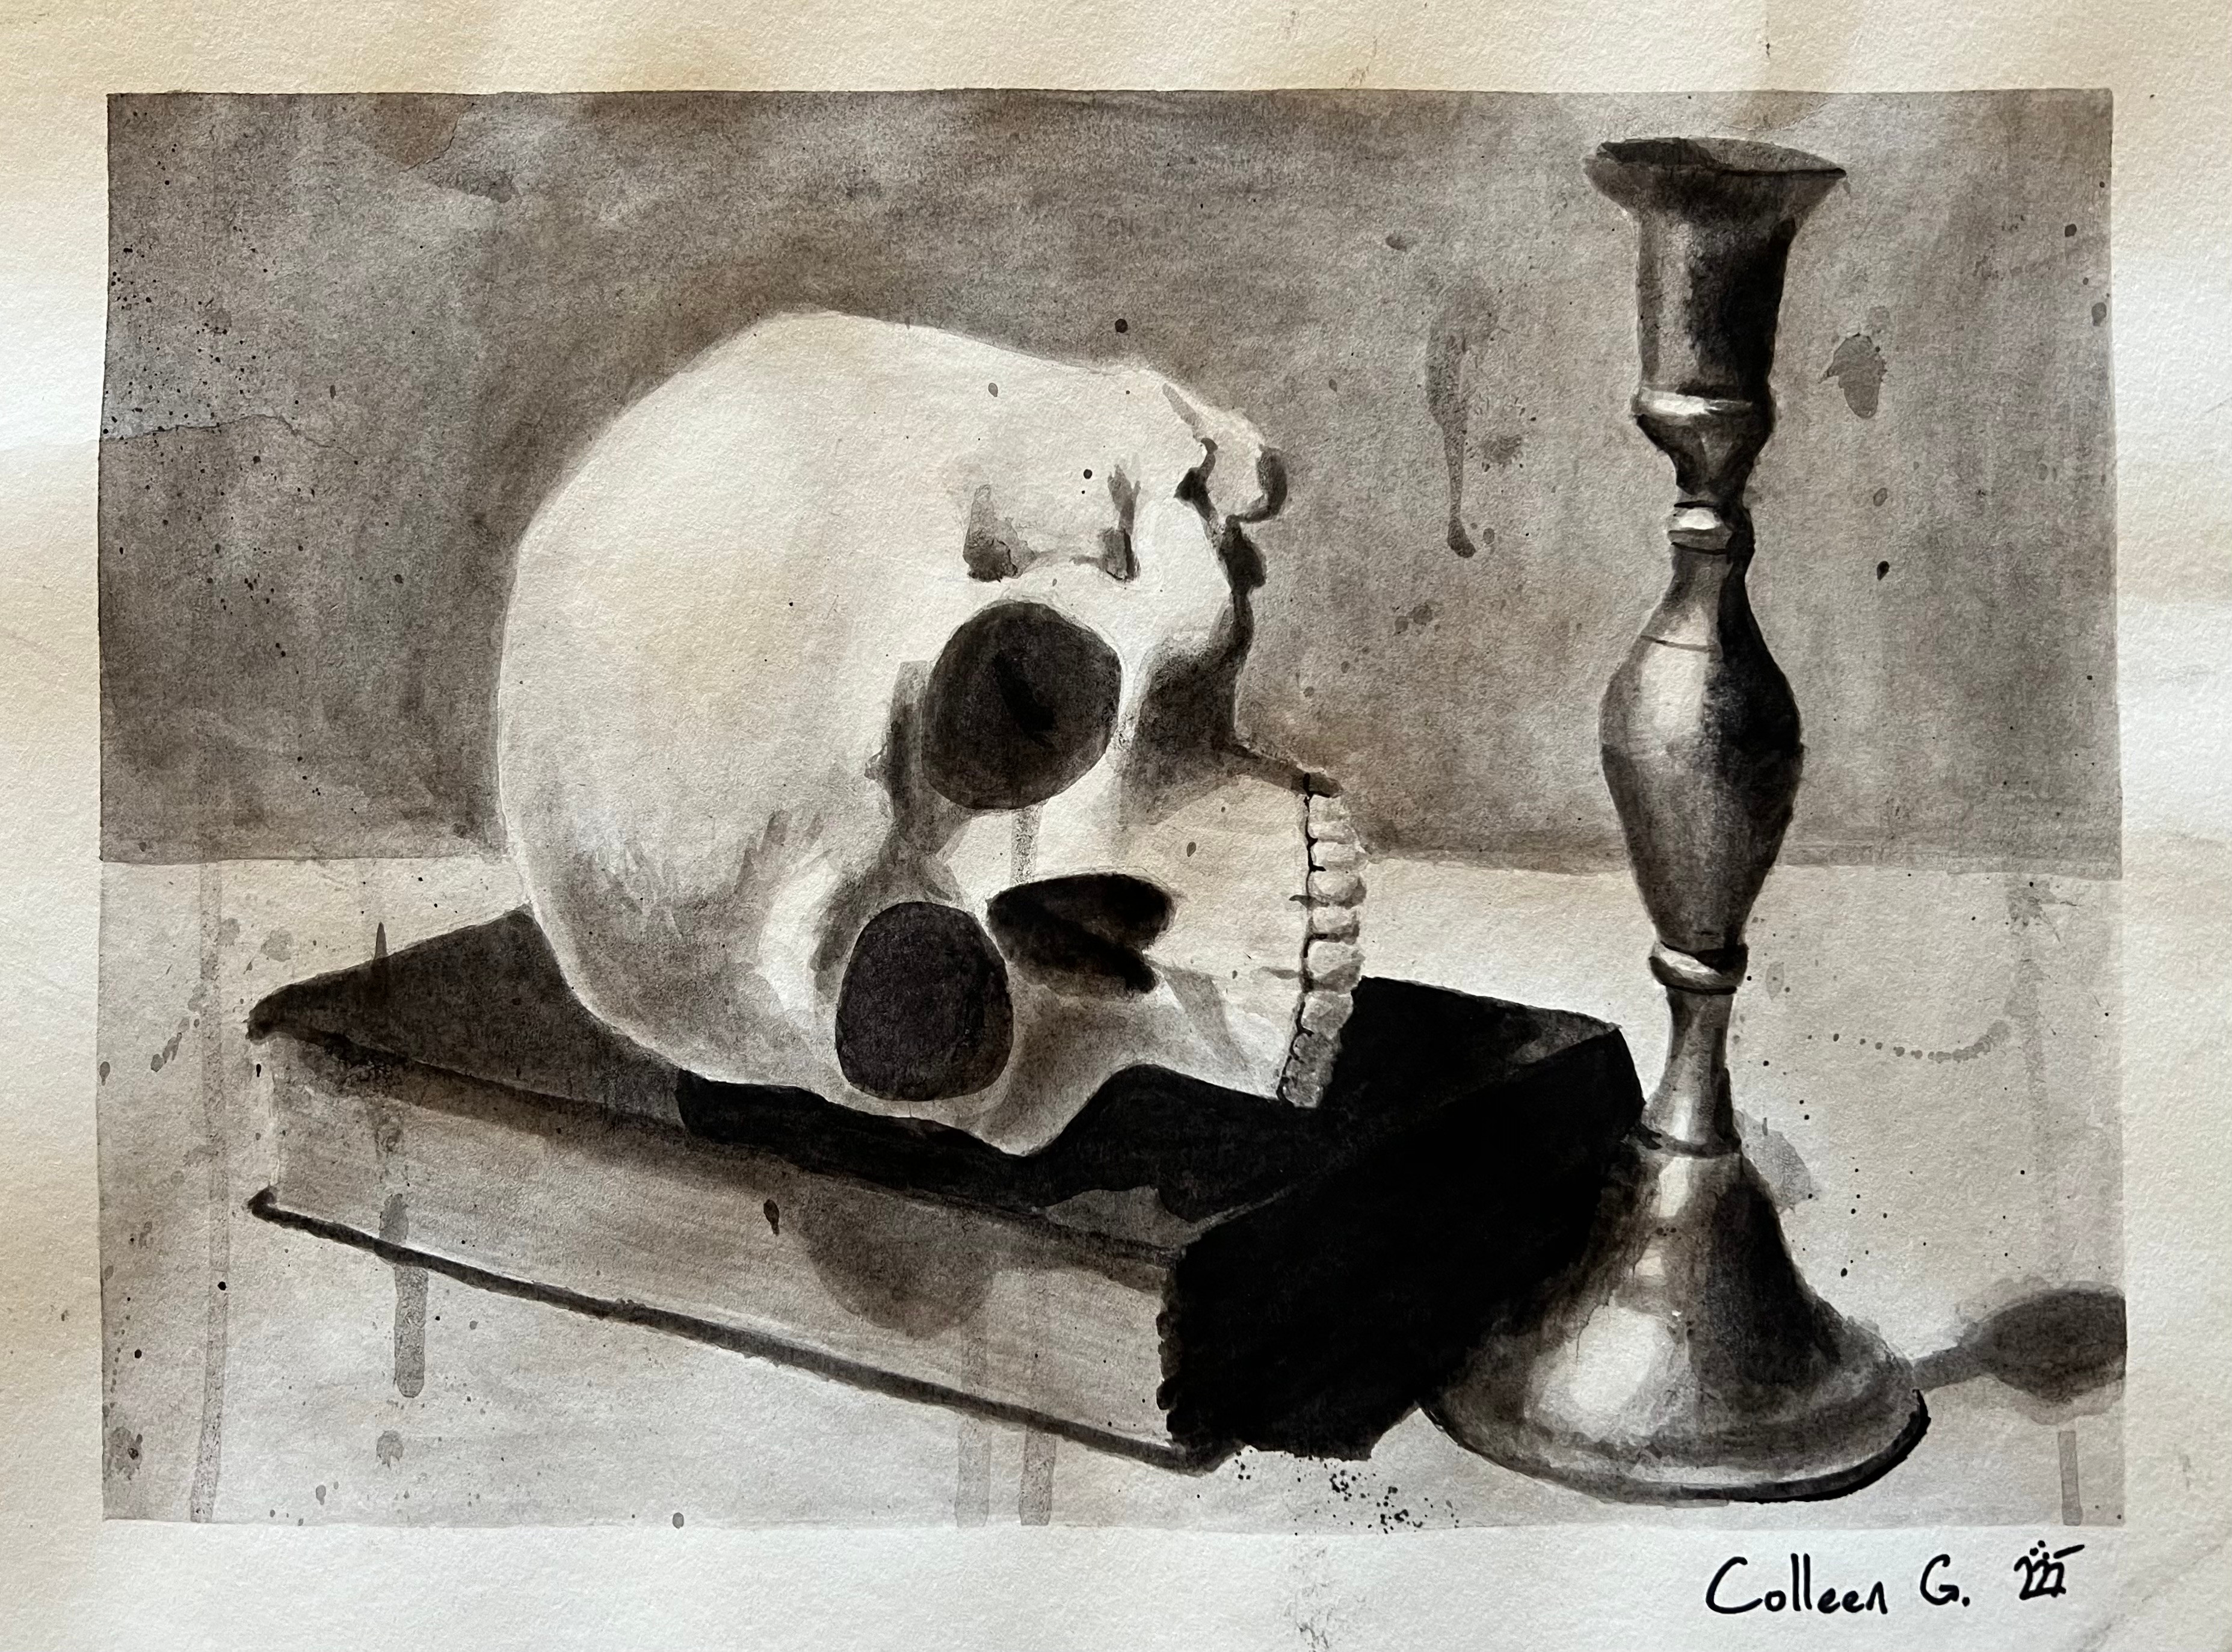 The only long-form project done in ink! My professor likes skulls. Used a brush, ink, and a pencil for the initial sketch. 
Time: 8 hours (ish?)